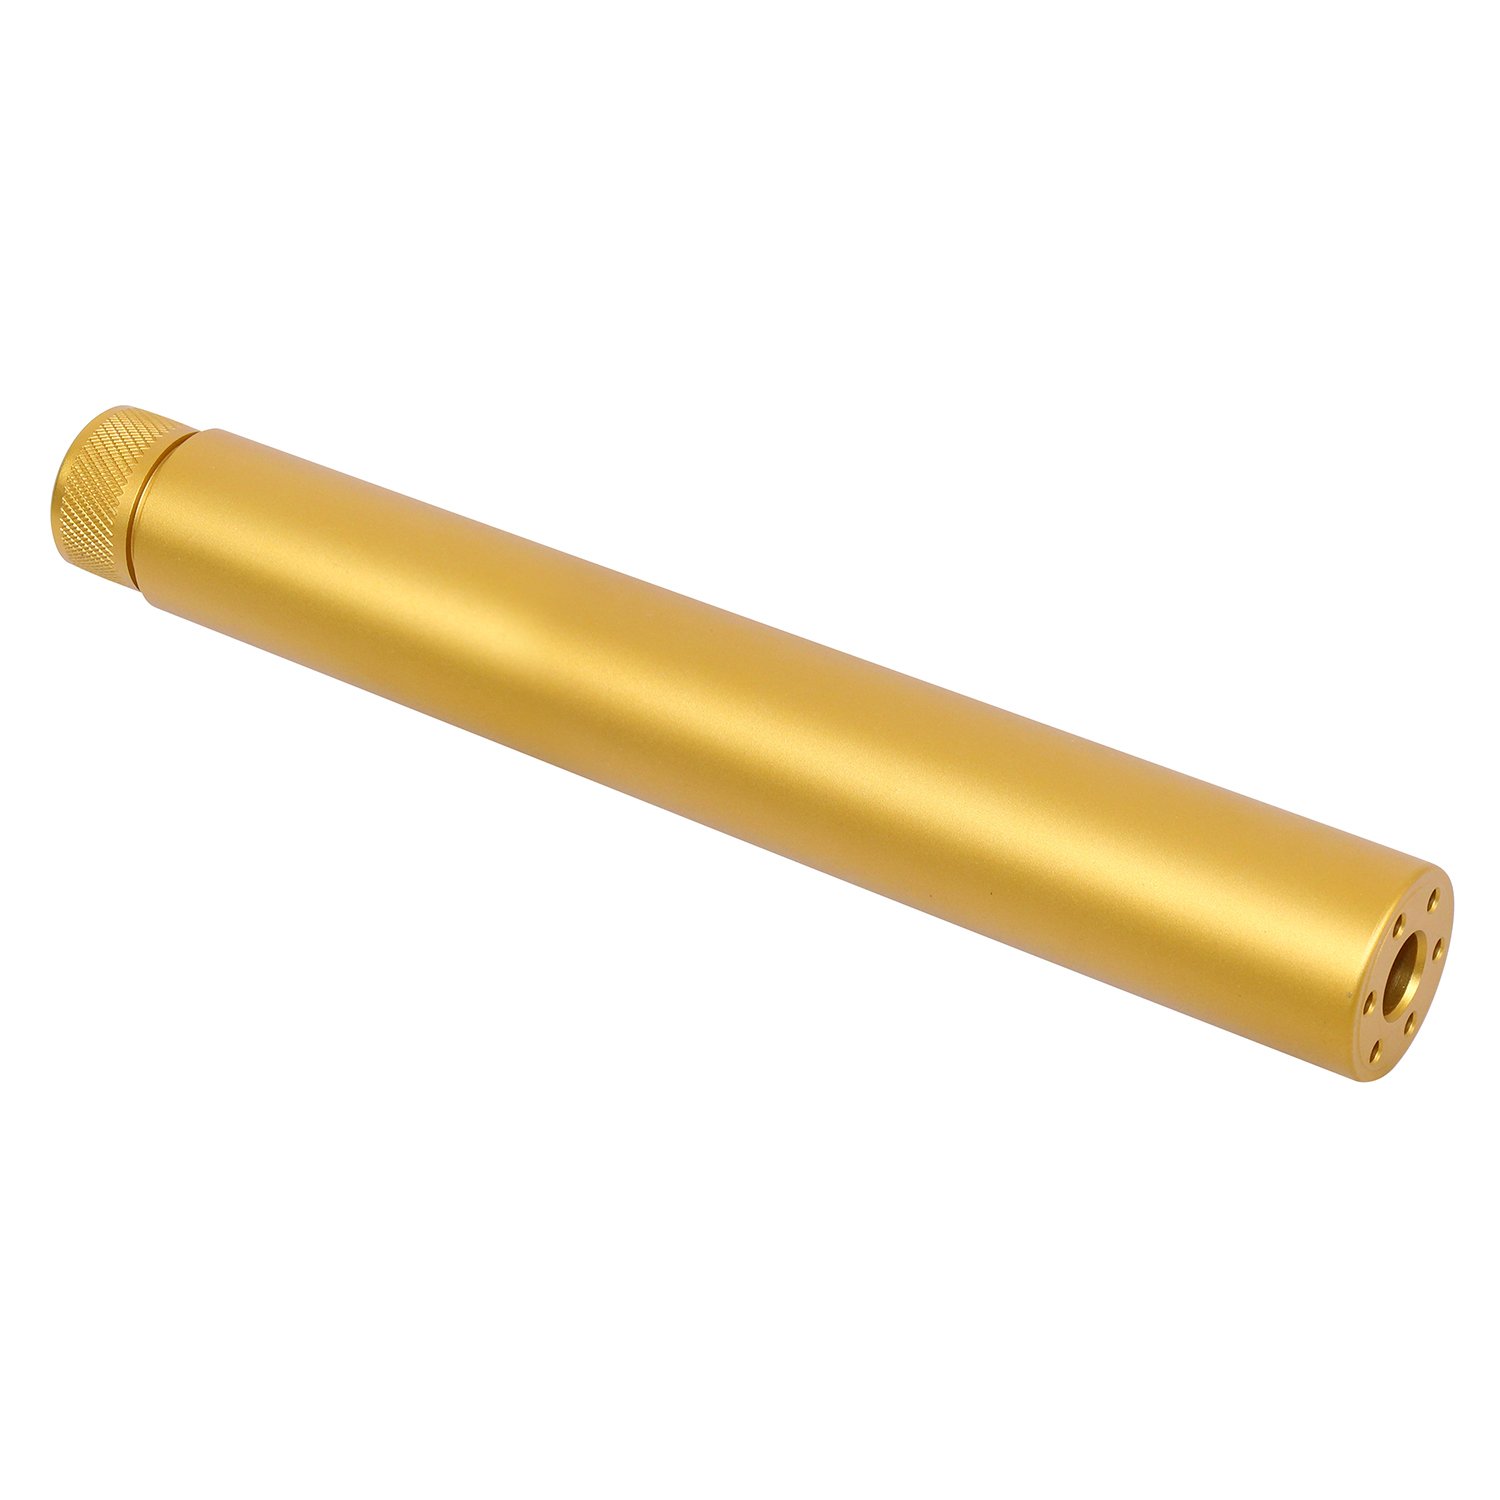 Gold-toned 9-inch AR-15 mock suppressor with a sleek, unmarked design.